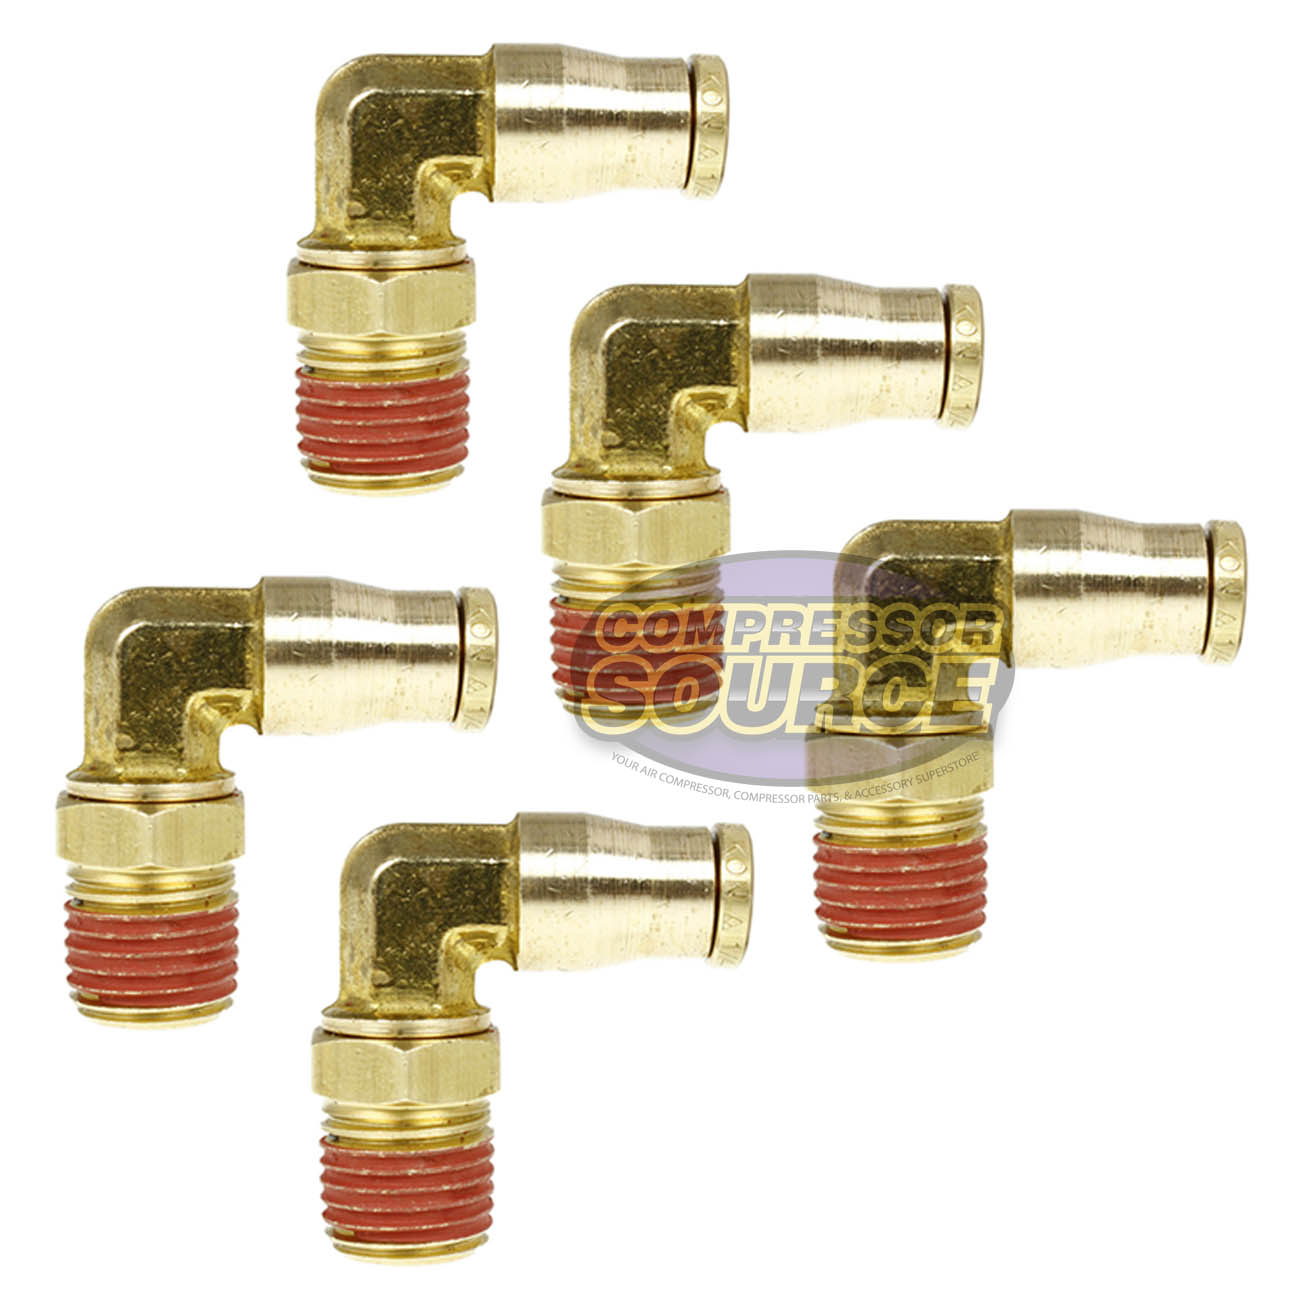 5 Pack 1/4" x 1/4" Push-In x Male NPTF Swivel Elbow Brass Quick Connect Fitting